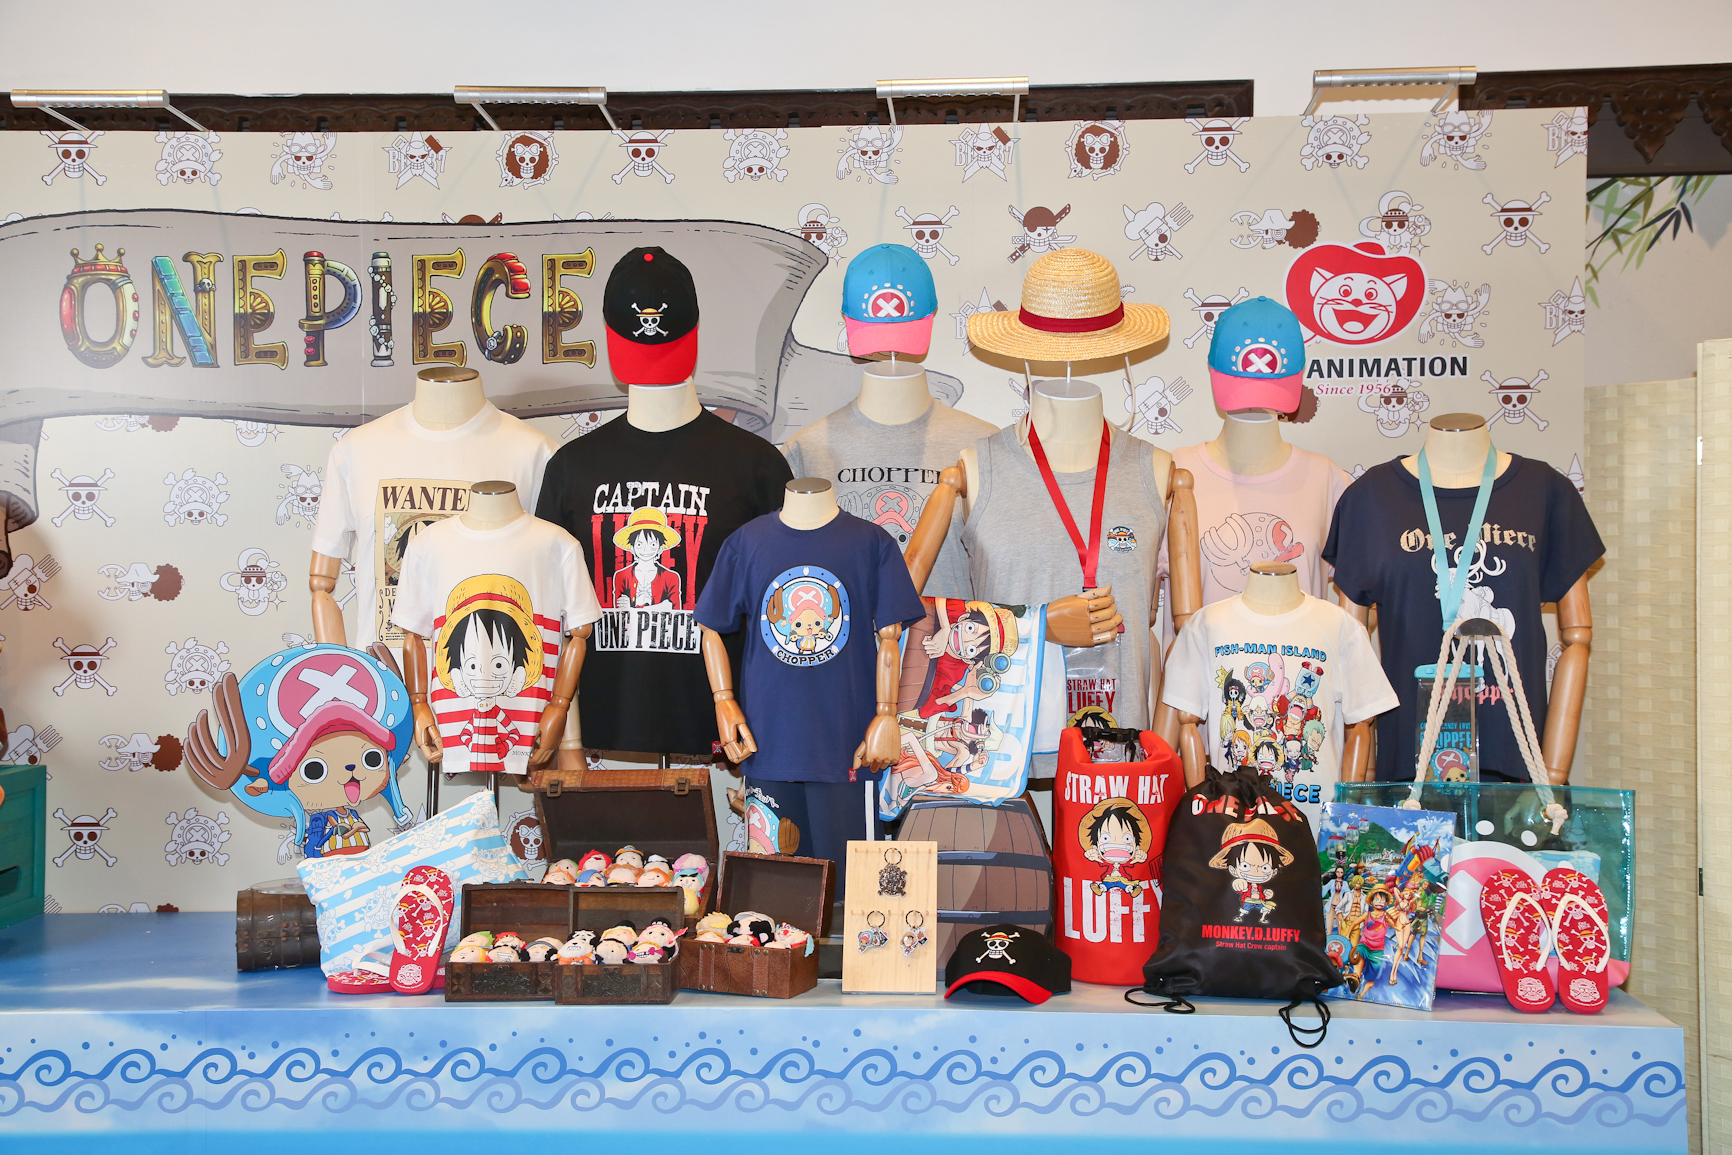 Don’t Miss: Hong Kong’s largest ever One Piece event happening at Ocean Park Hong Kong - Alvinology